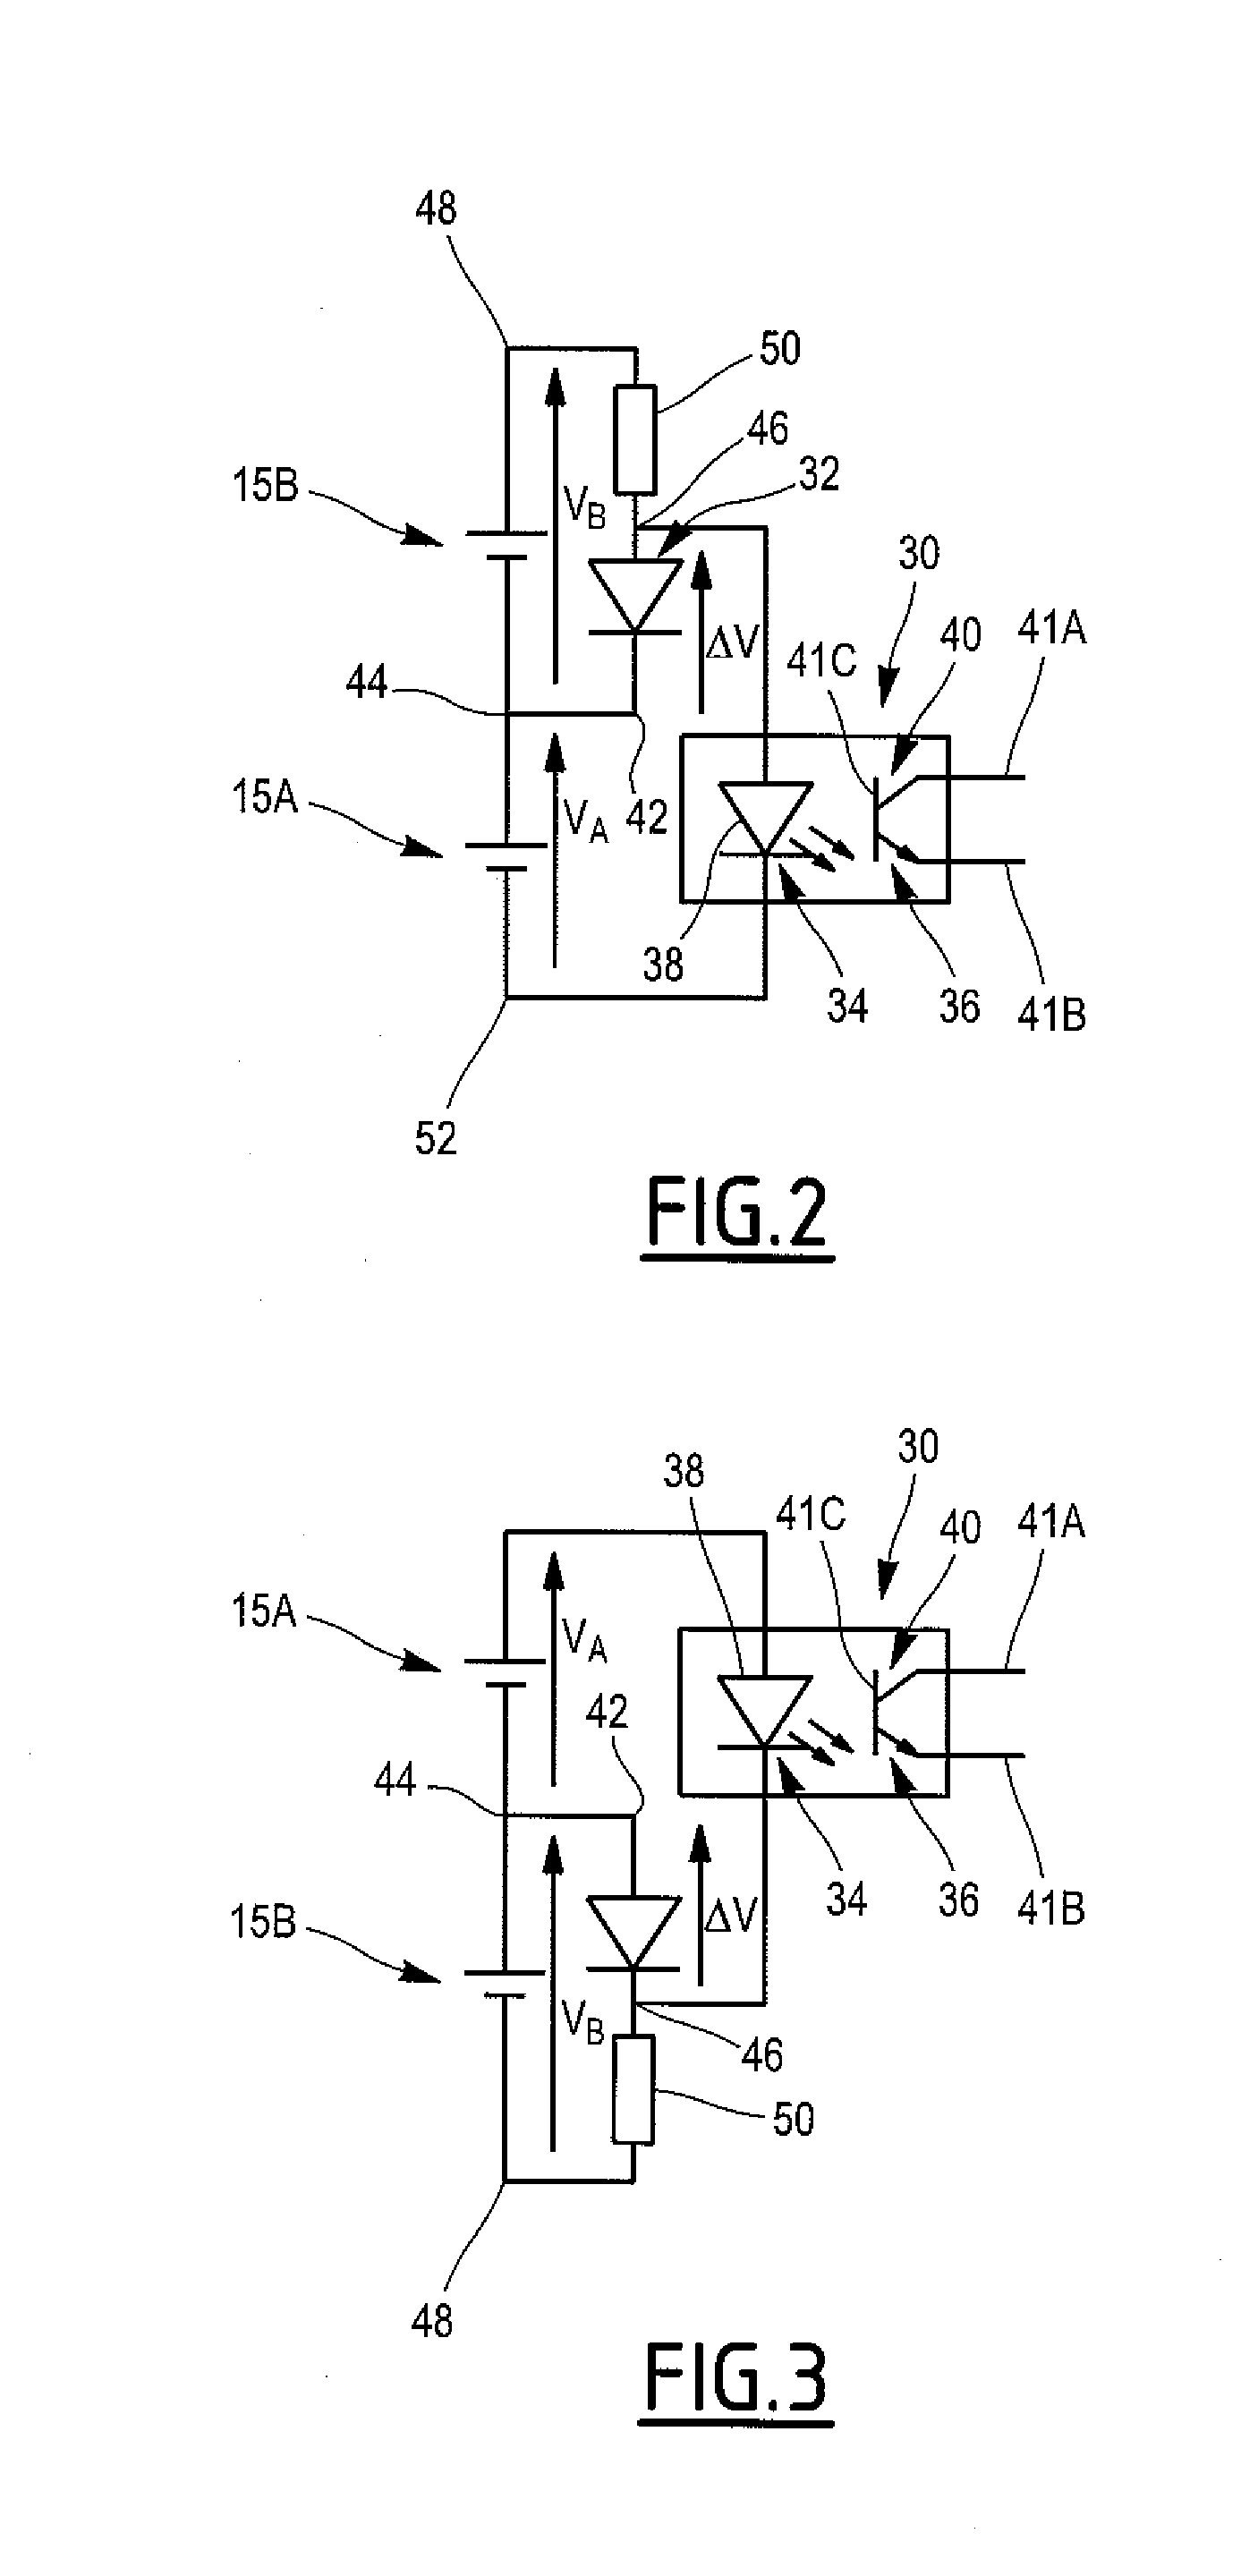 Battery comprising a plurality of elecrochemical cells and, for each cell, a device for controlling the voltage across the terminals of said cell